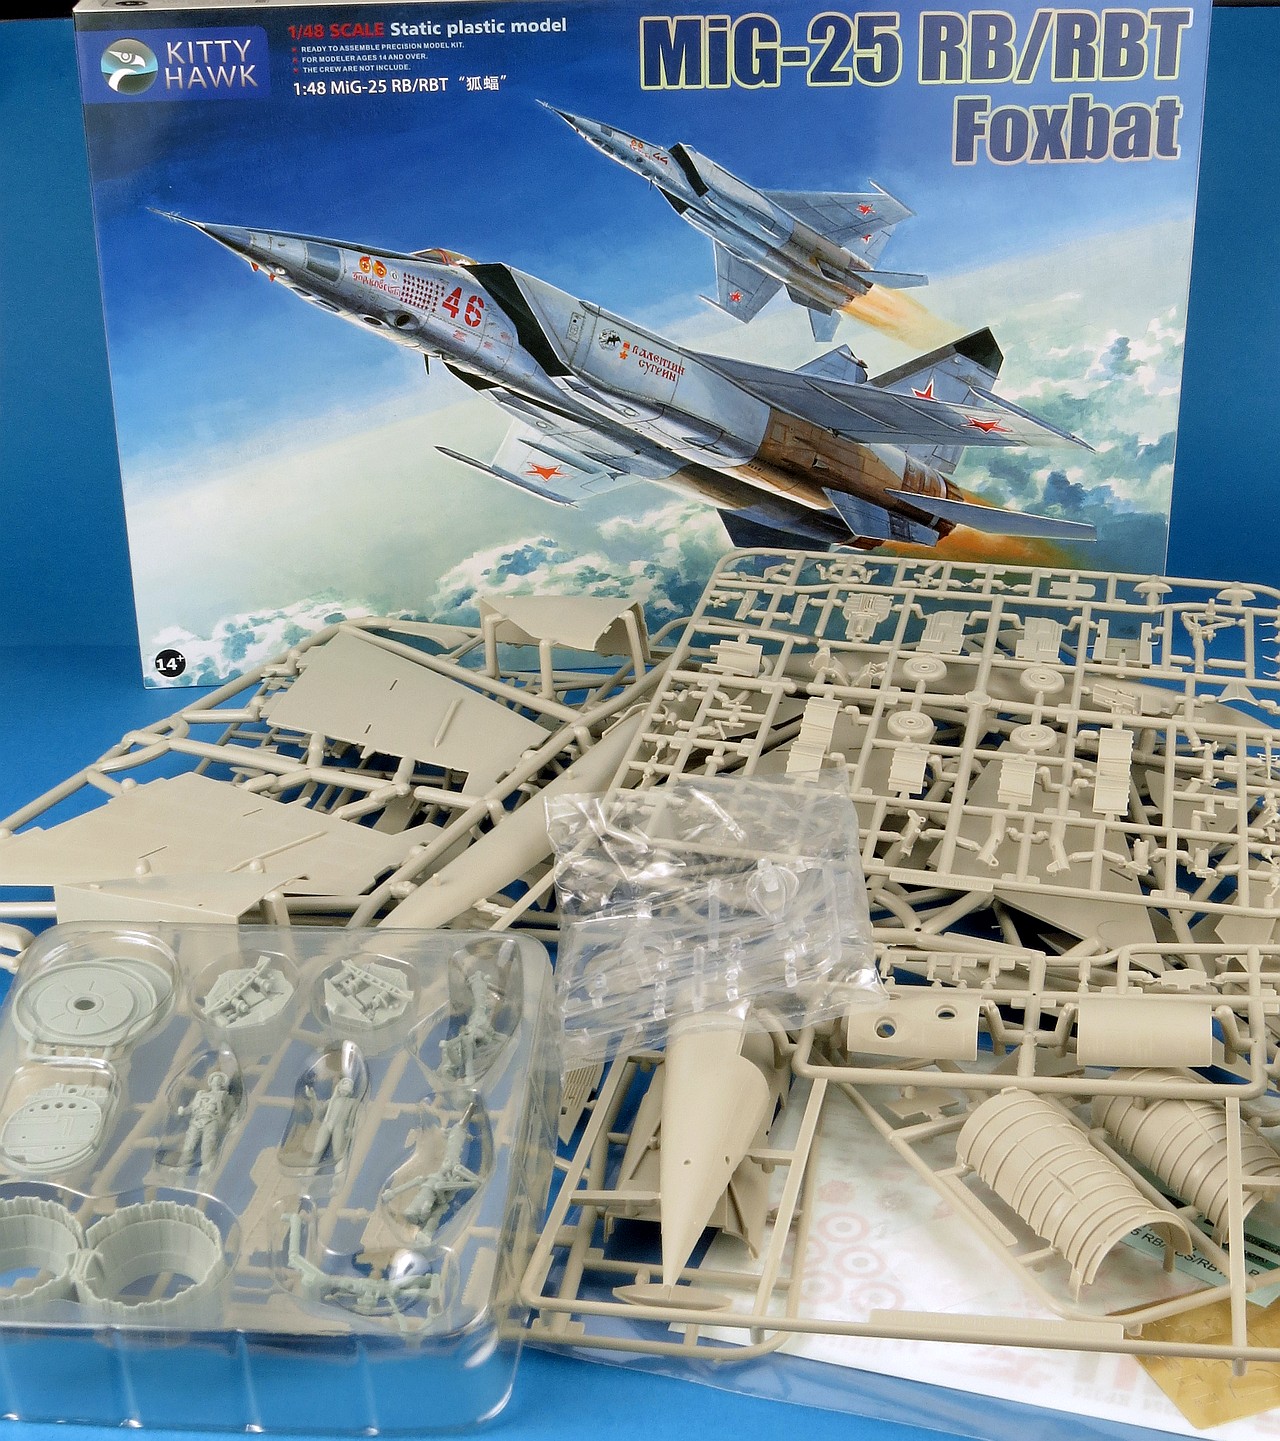 Kitty Hawk KH80113 1/48 MIG-25RB/RBS Foxbat  FREE RESIN FIGURES INCLUDED 